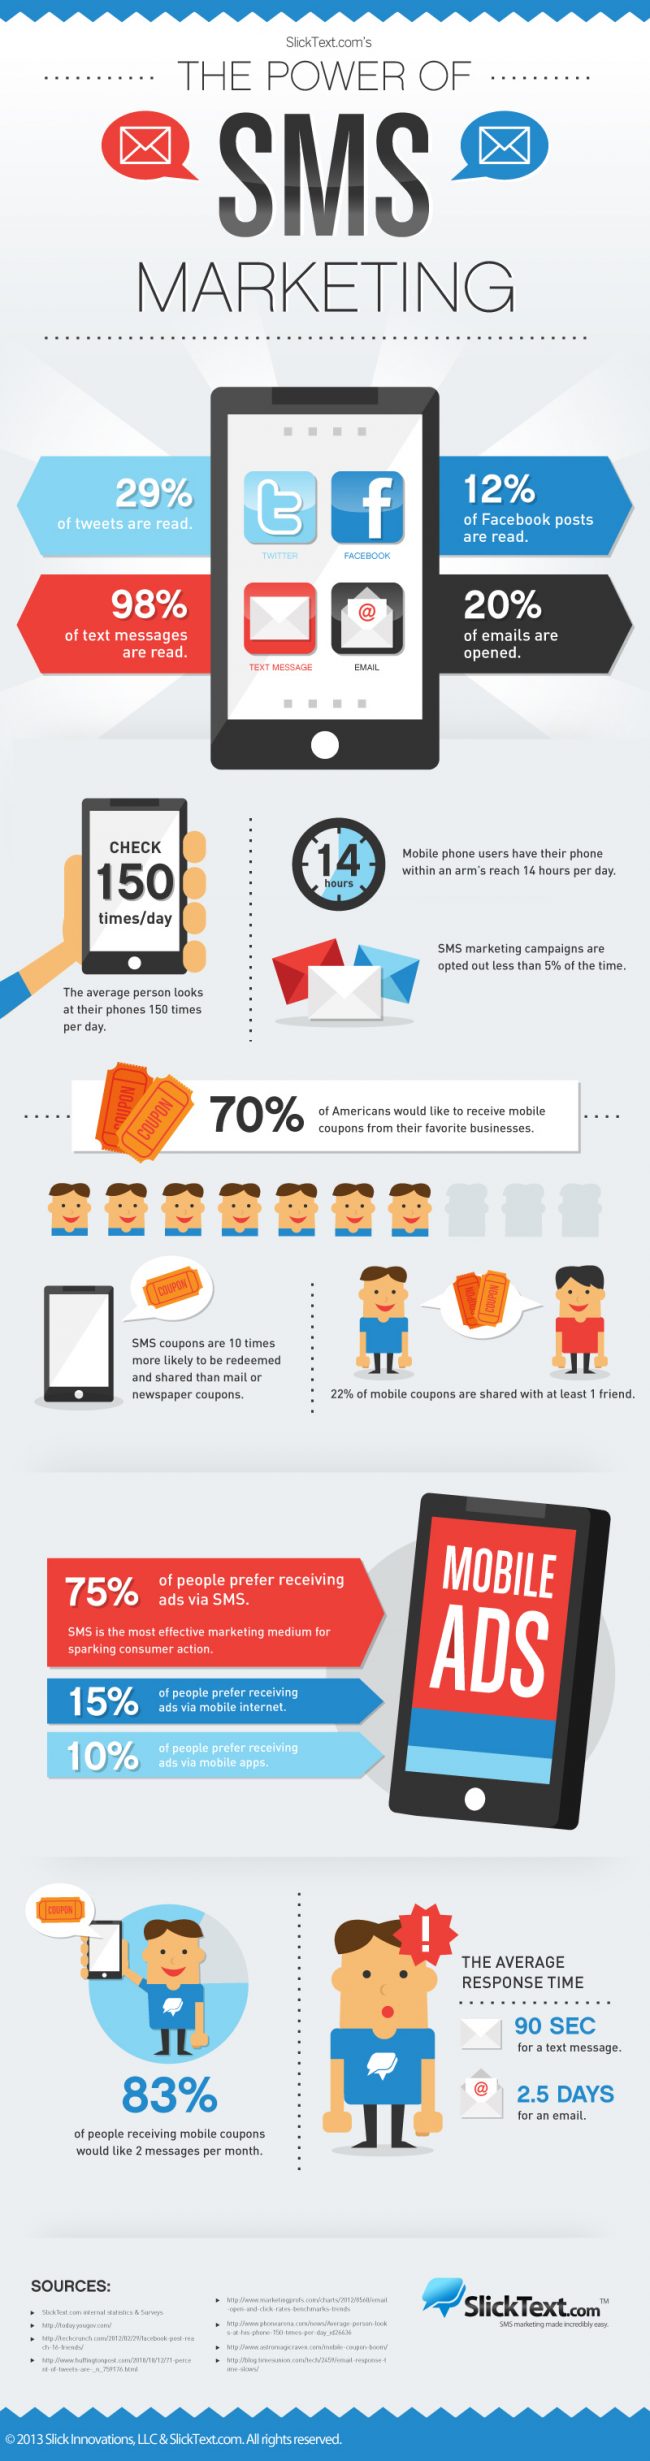 sms marketing infographic 650x2461 The Power Of SMS Marketing